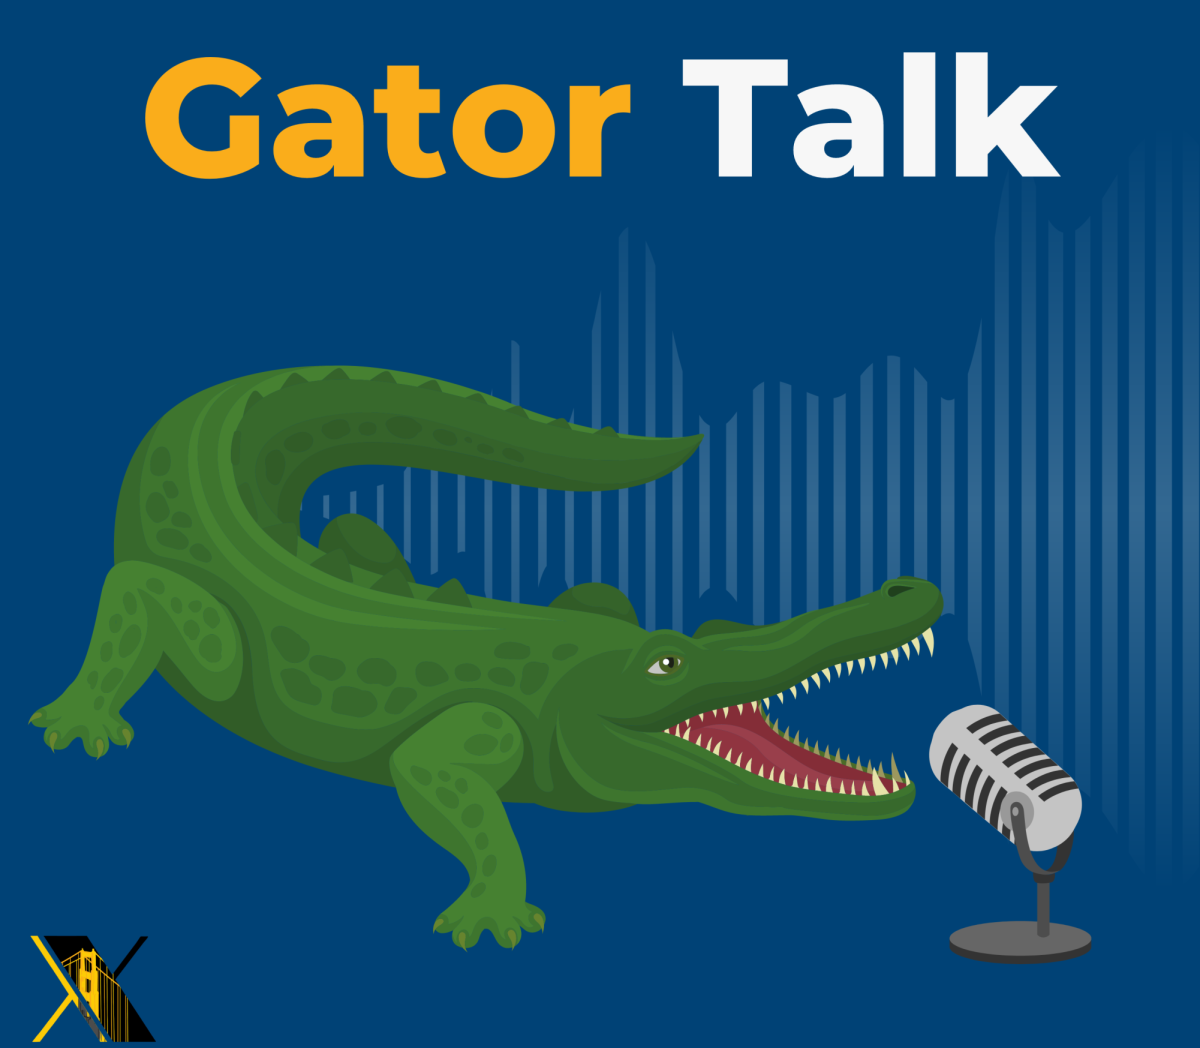 Gator Talk: The untold stories of Cesar Chavez through the eyes of one of his closest colleagues